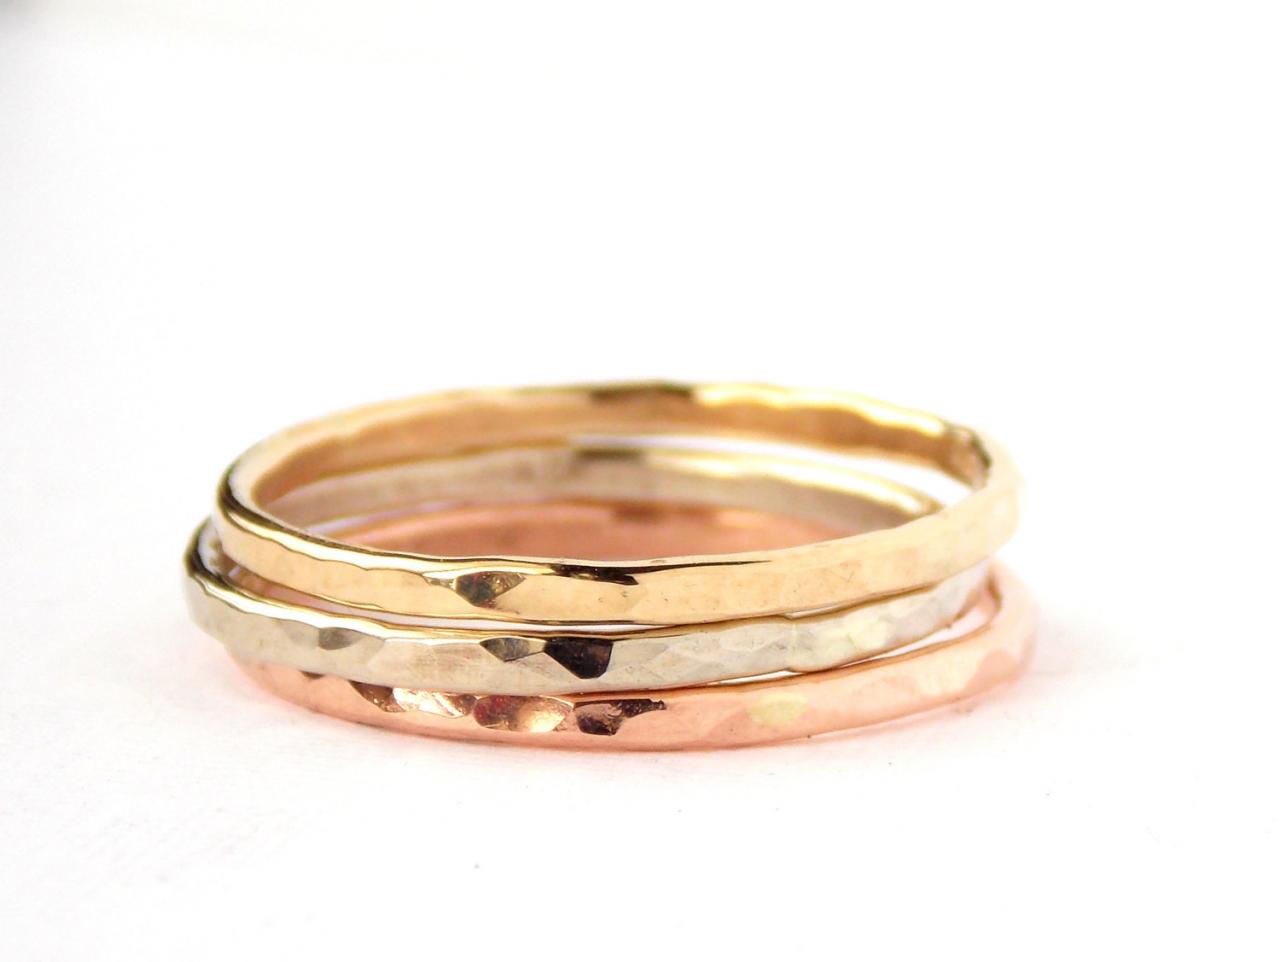 3 Gold Reflection Rings: 14k Gold, Dainty Ring, Simple Ring, Gold Ring, Rose Gold, White Gold, Yellow Gold, Hammered Ring, Skinny Ring